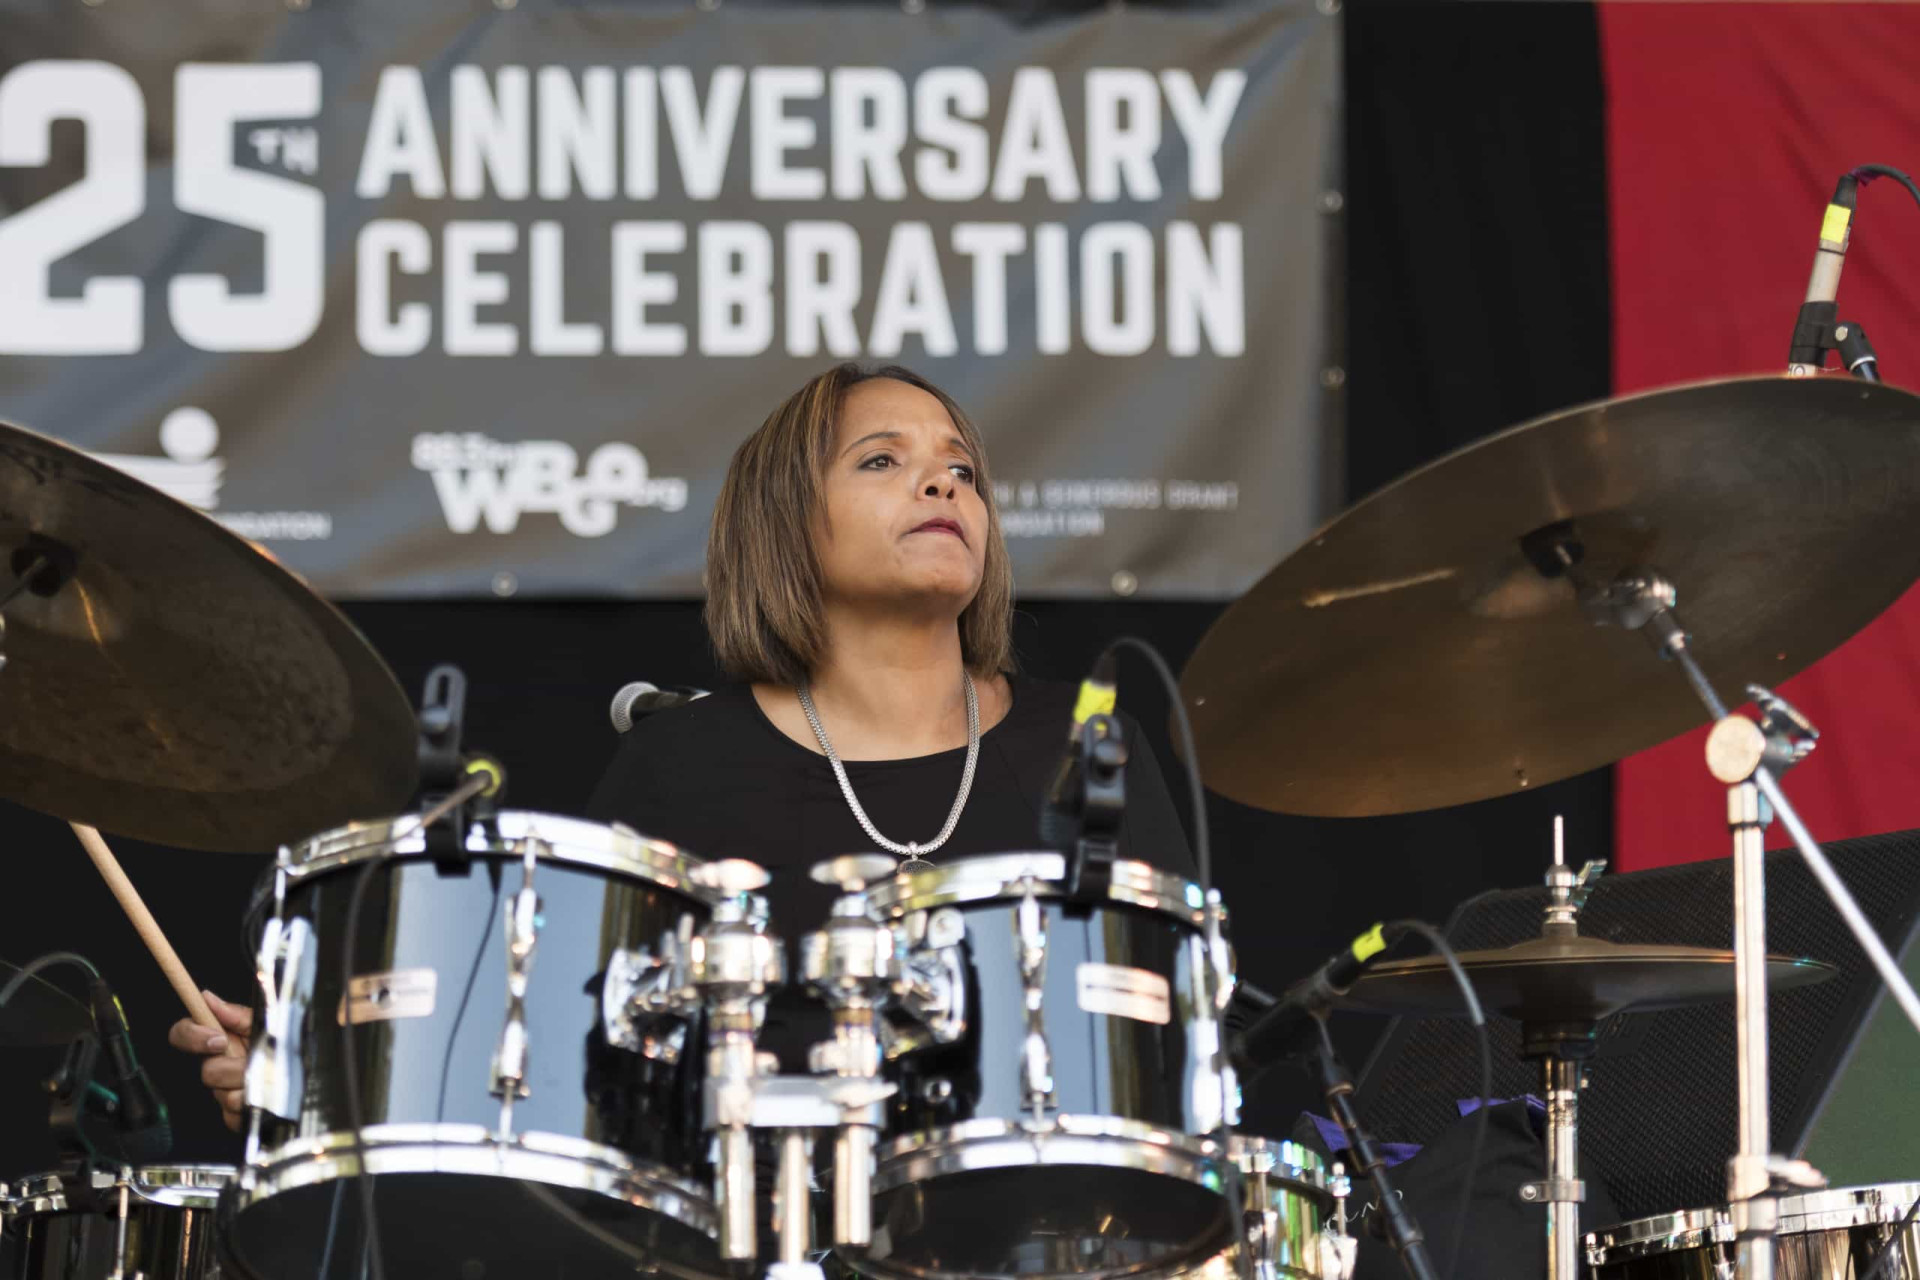 <p>Terri Lyne Carrington is one of the most prolific and celebrated percussionists in jazz. Over the years, Carrington has laid down rhythms behind Dizzy Gillespie and Wayne Shorter, and was a member of Herbie Hancock's band for a decade.</p><p>You may also like:<a href="https://www.starsinsider.com/n/415865?utm_source=msn.com&utm_medium=display&utm_campaign=referral_description&utm_content=507986v1en-sg"> The most iconic supermodels of all time</a></p>